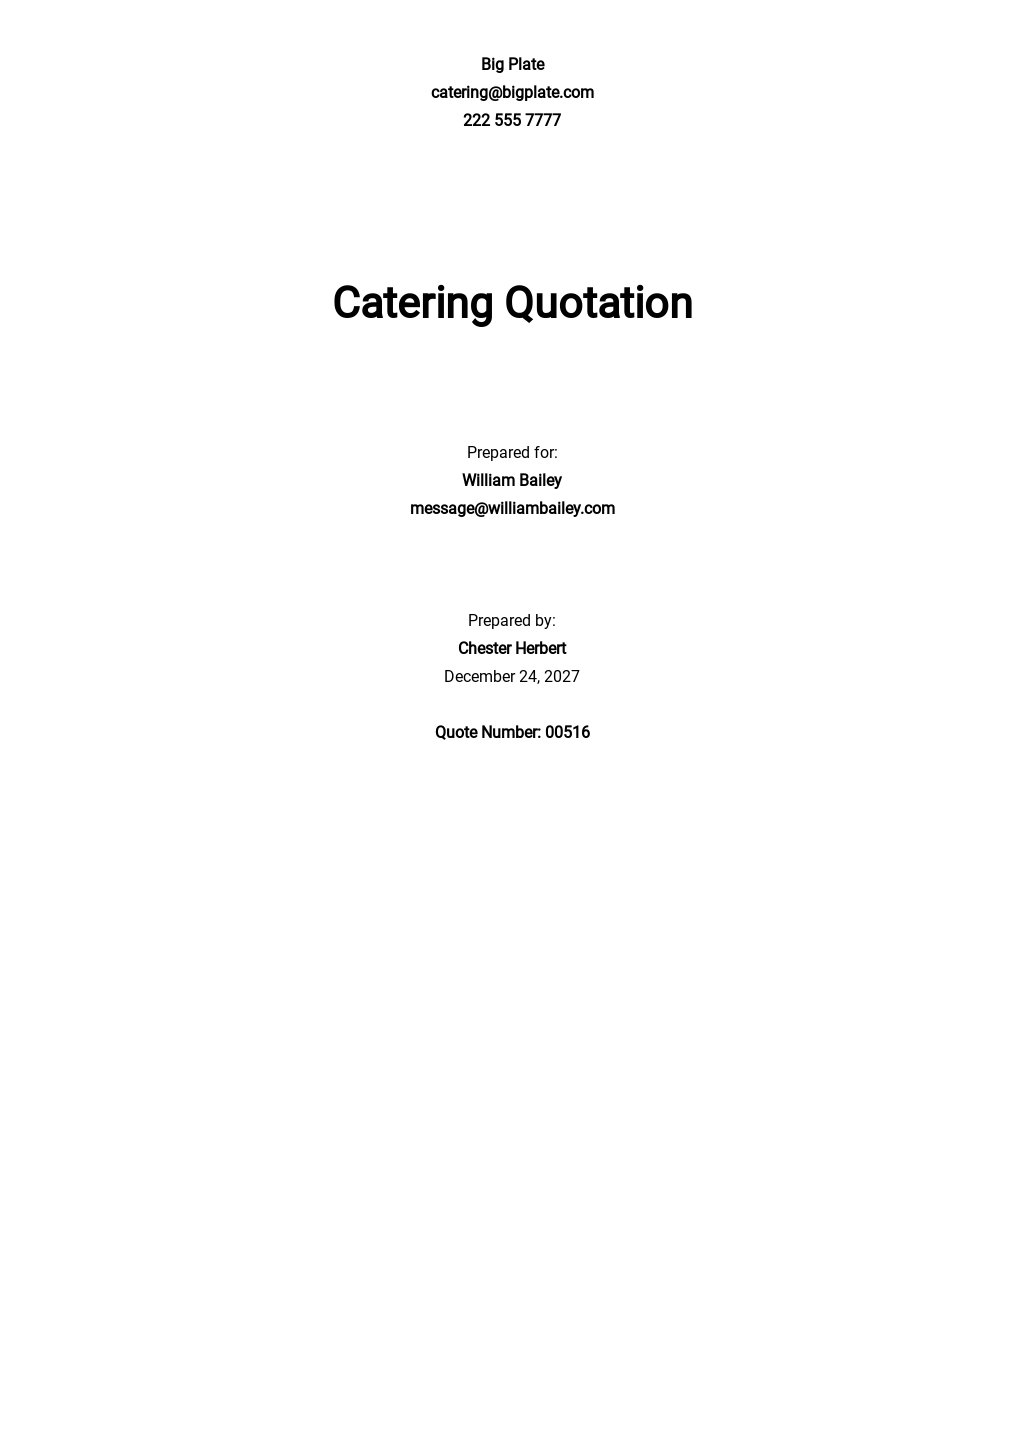 Catering Quotation Template.jpe